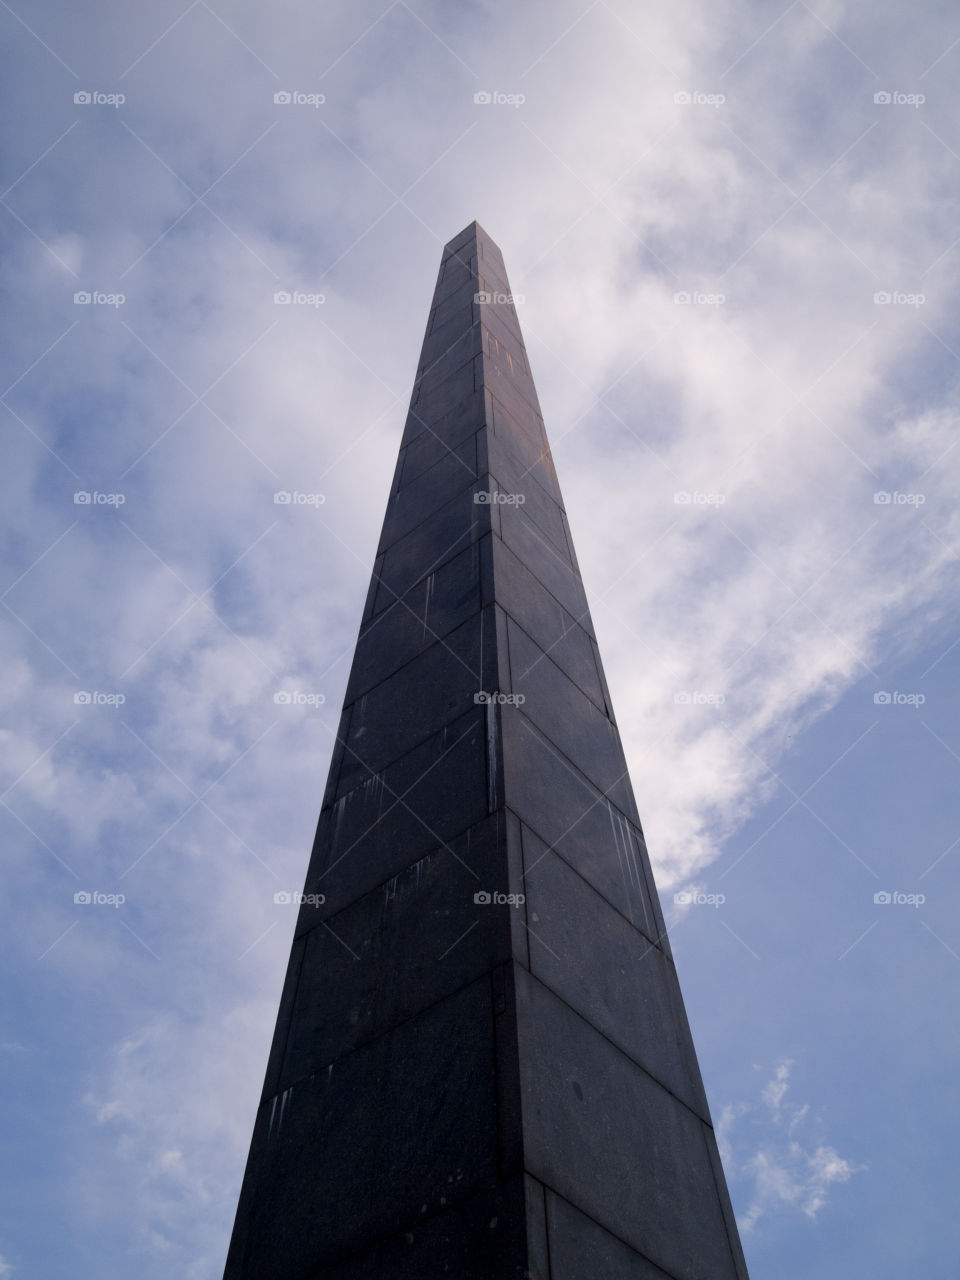 gray concrete cone-shaped monument under a blue sky with white clouds